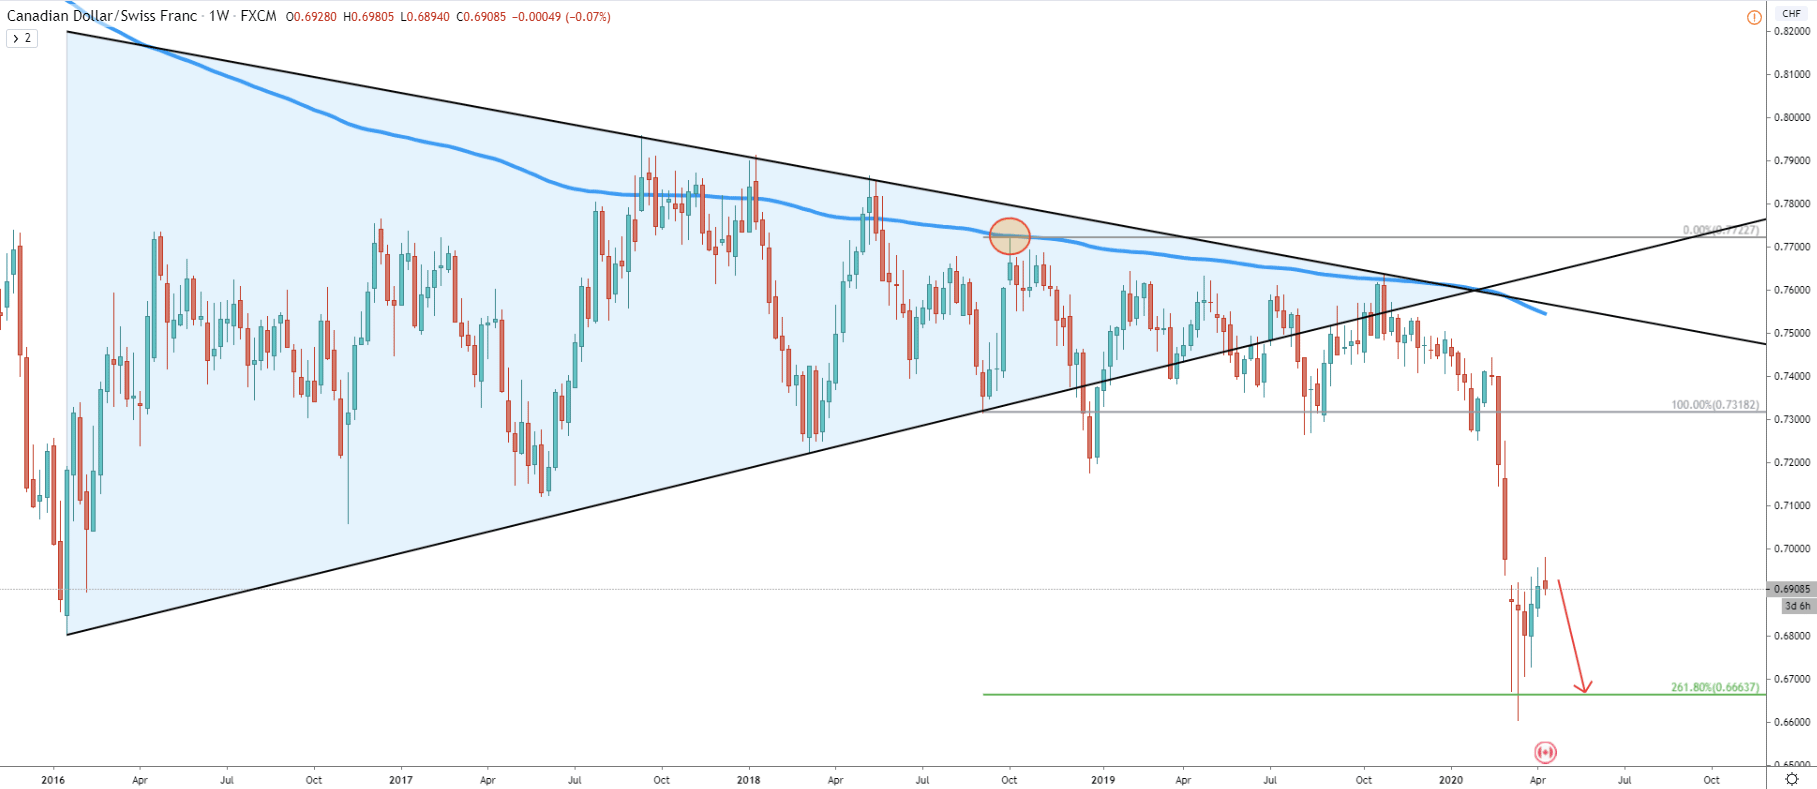 CAD/CHF Weekly Technical Analysis 14 Apr 2020